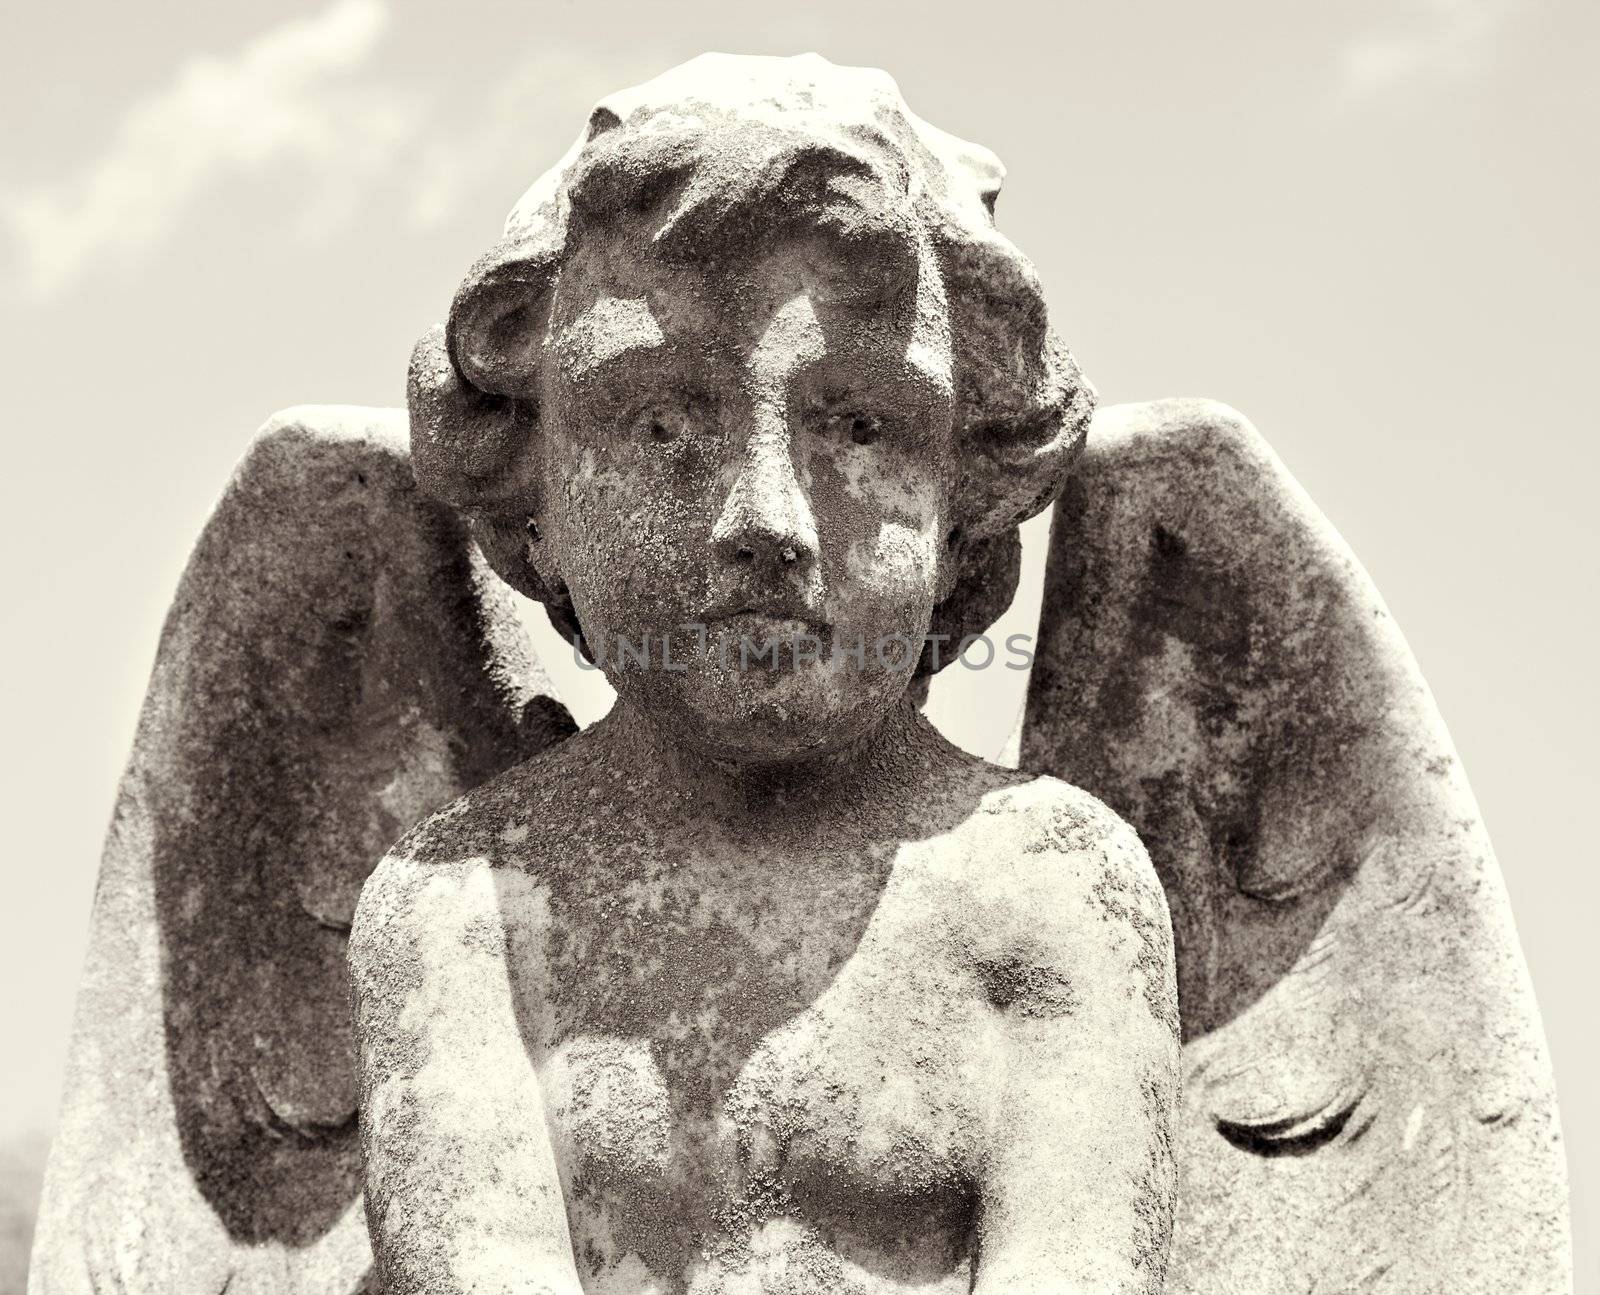 Cherub with wings statue. by iofoto